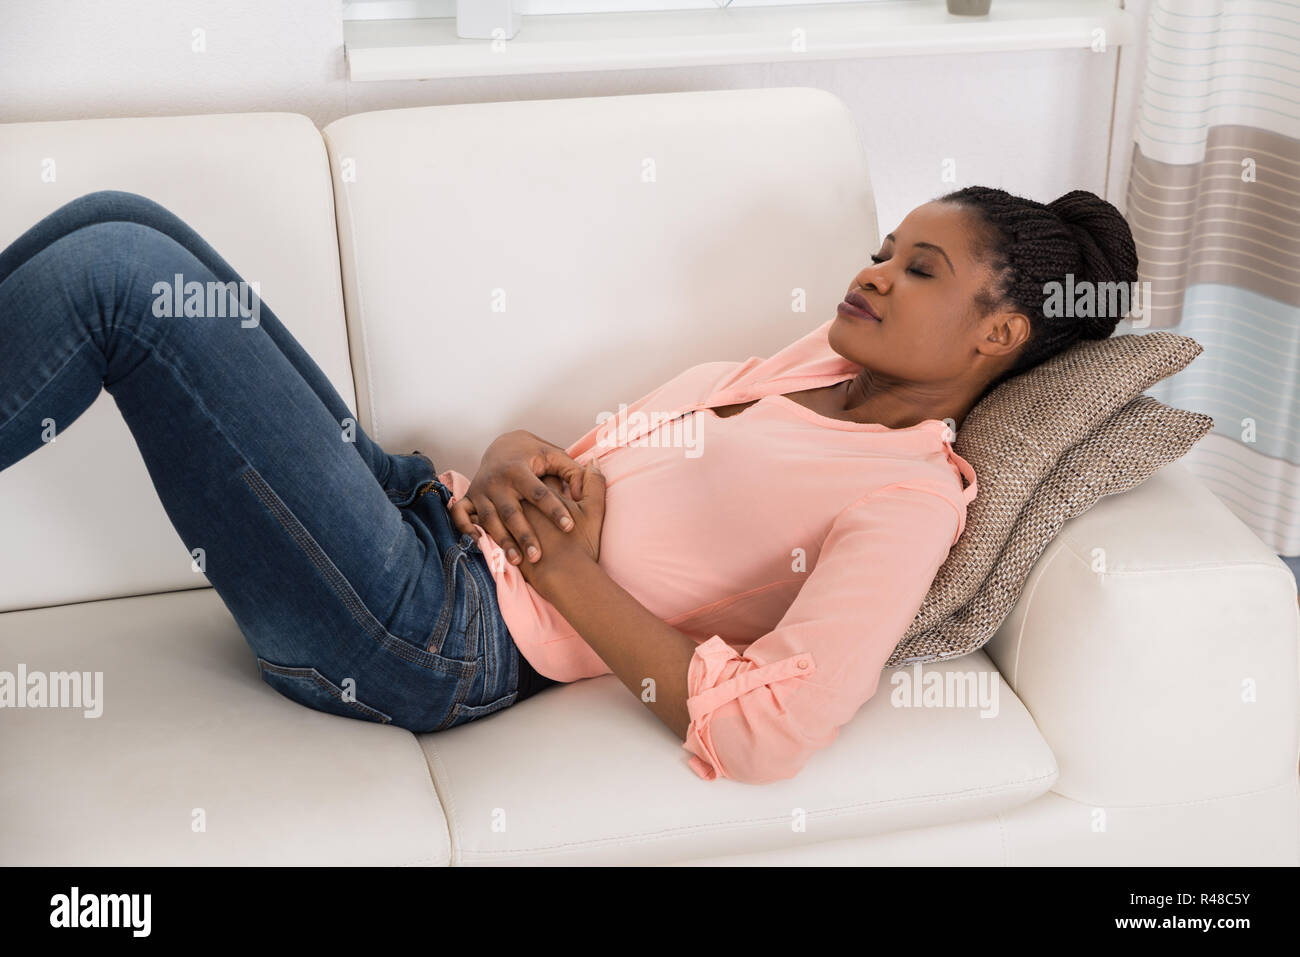 Woman Suffering From Stomach Ache Stock Photo